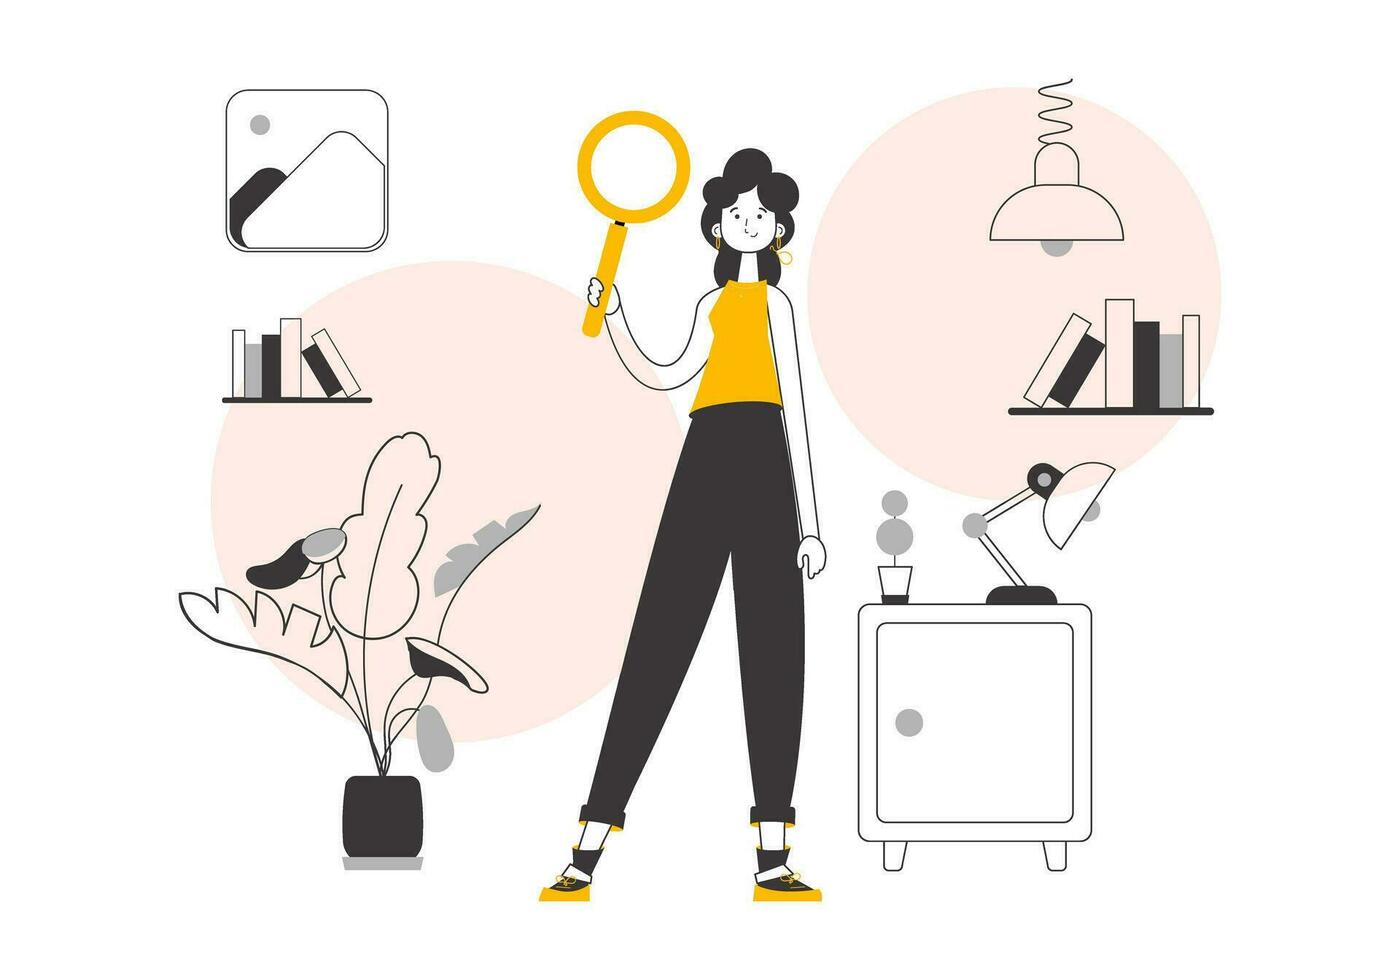 The girl is holding a magnifying glass in her hands. Search concept. Line art style. Vector illustration.